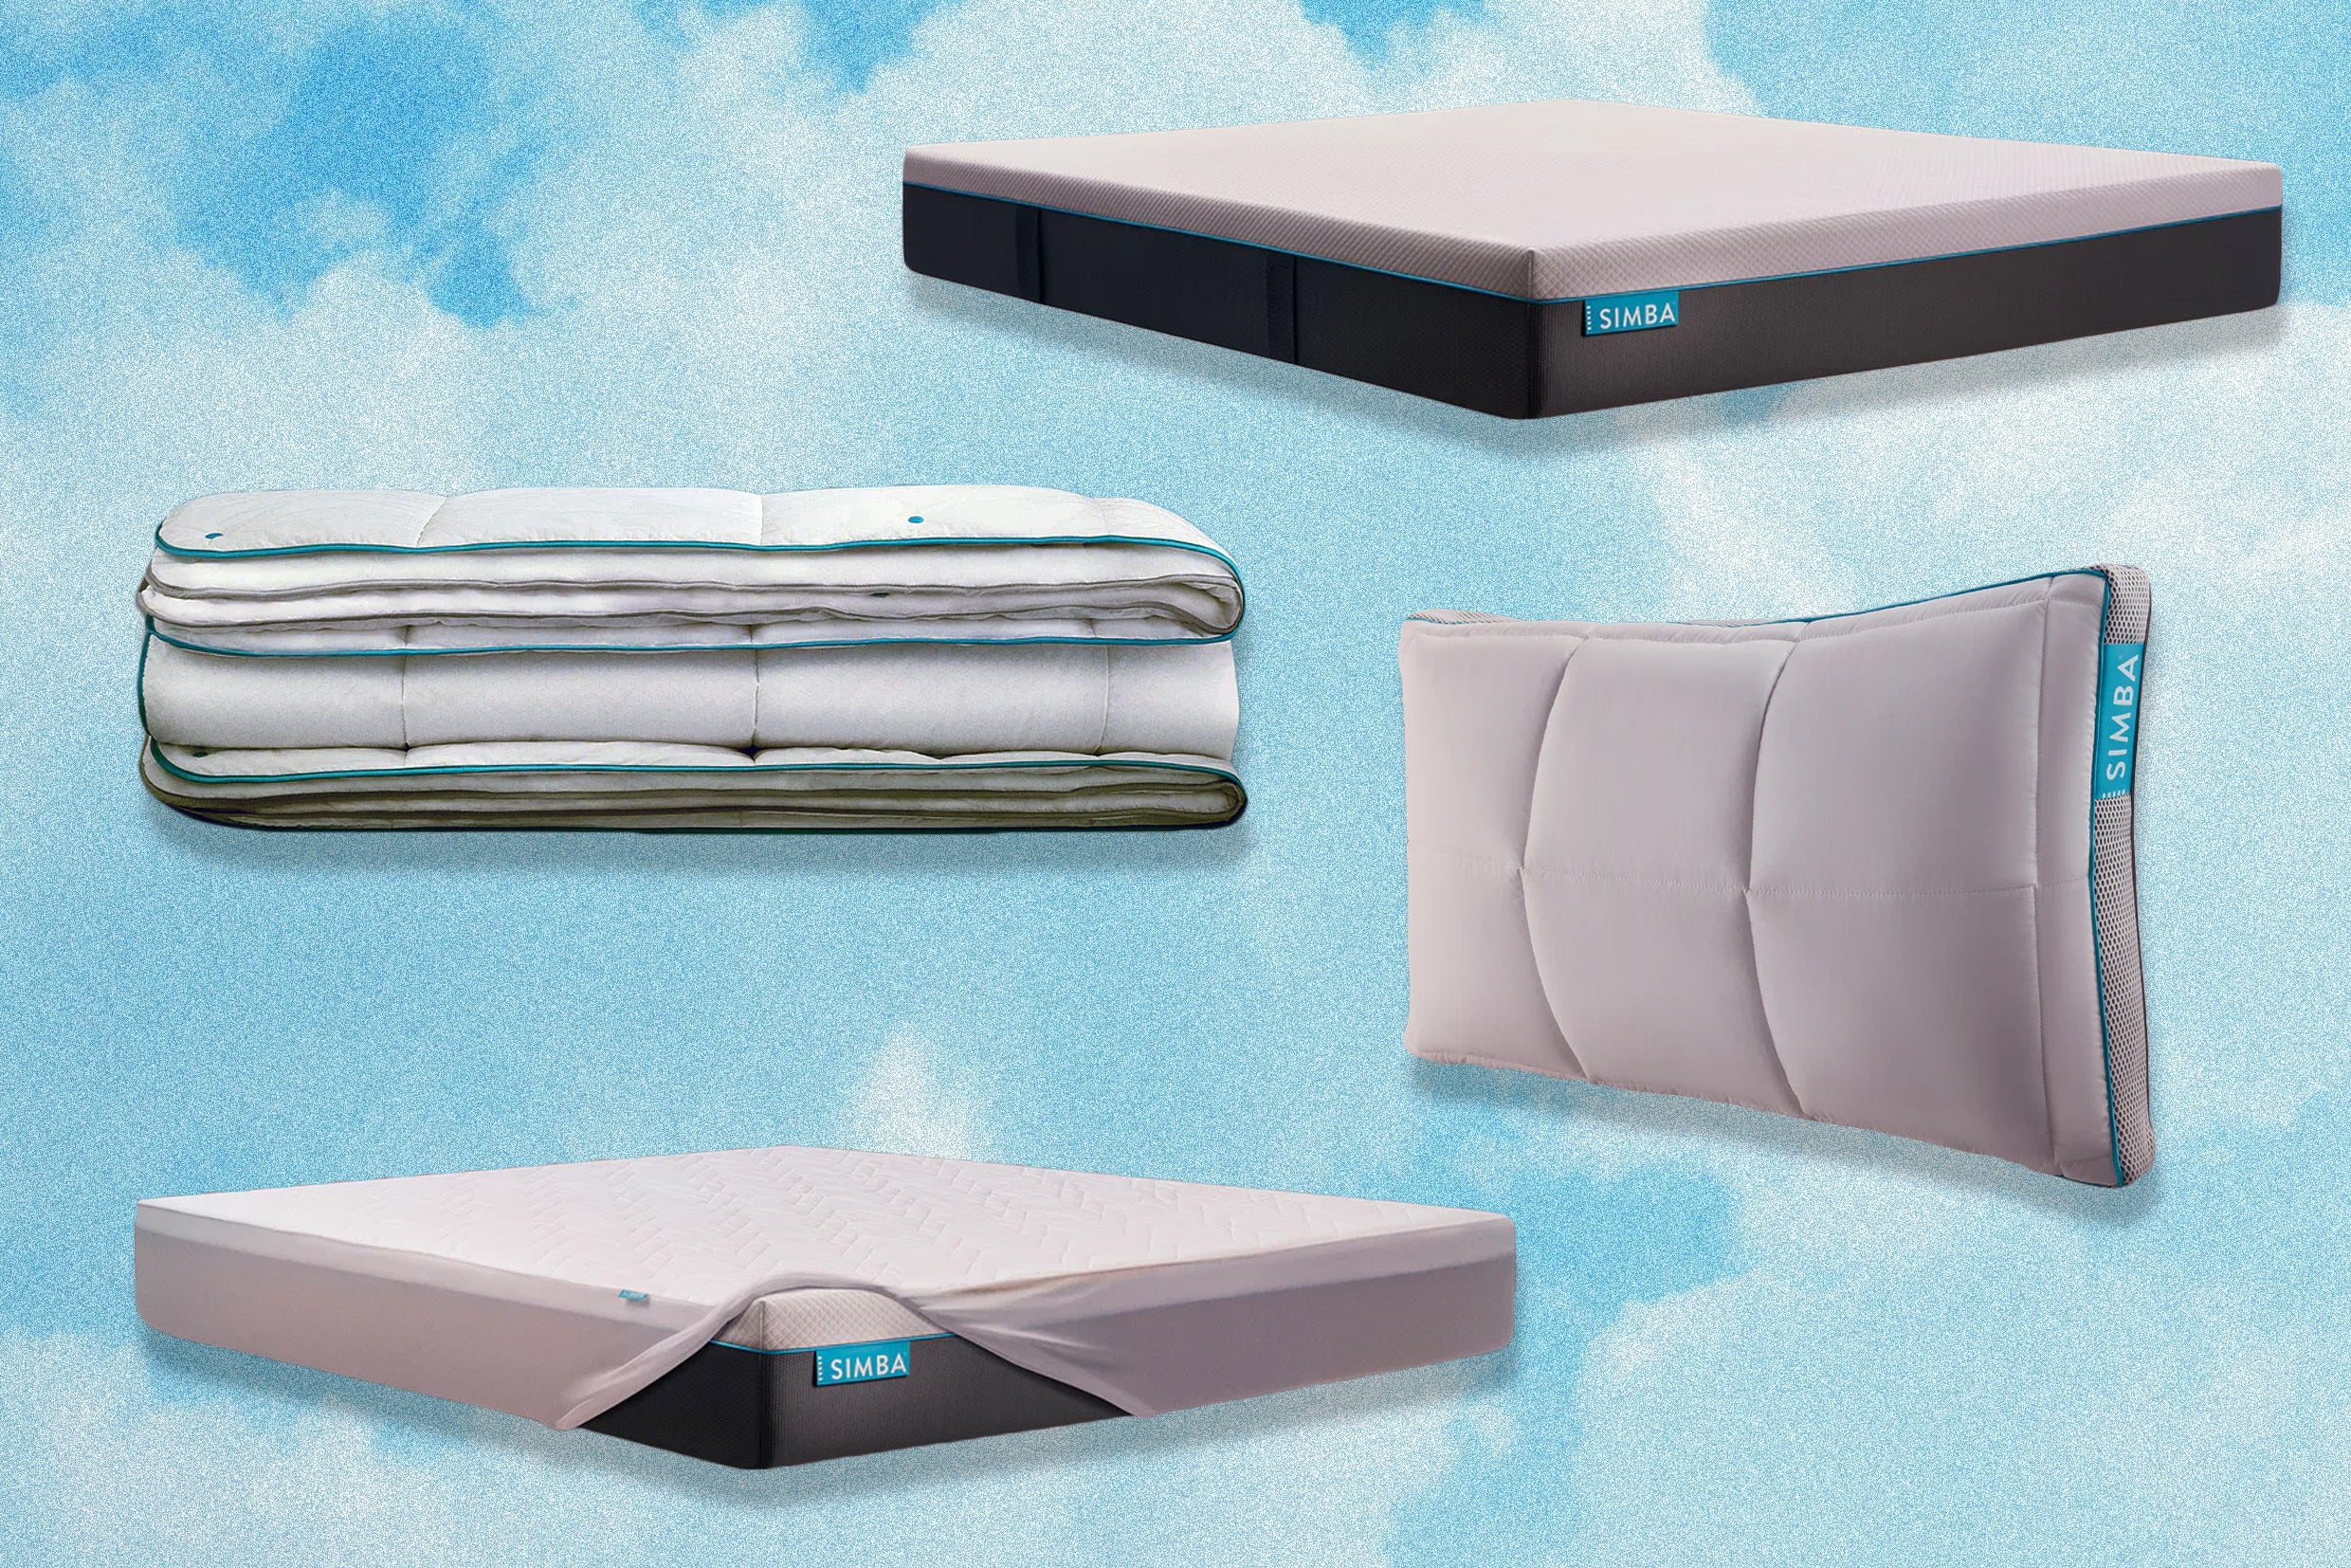 Now’s the time to get mattresses and more for less